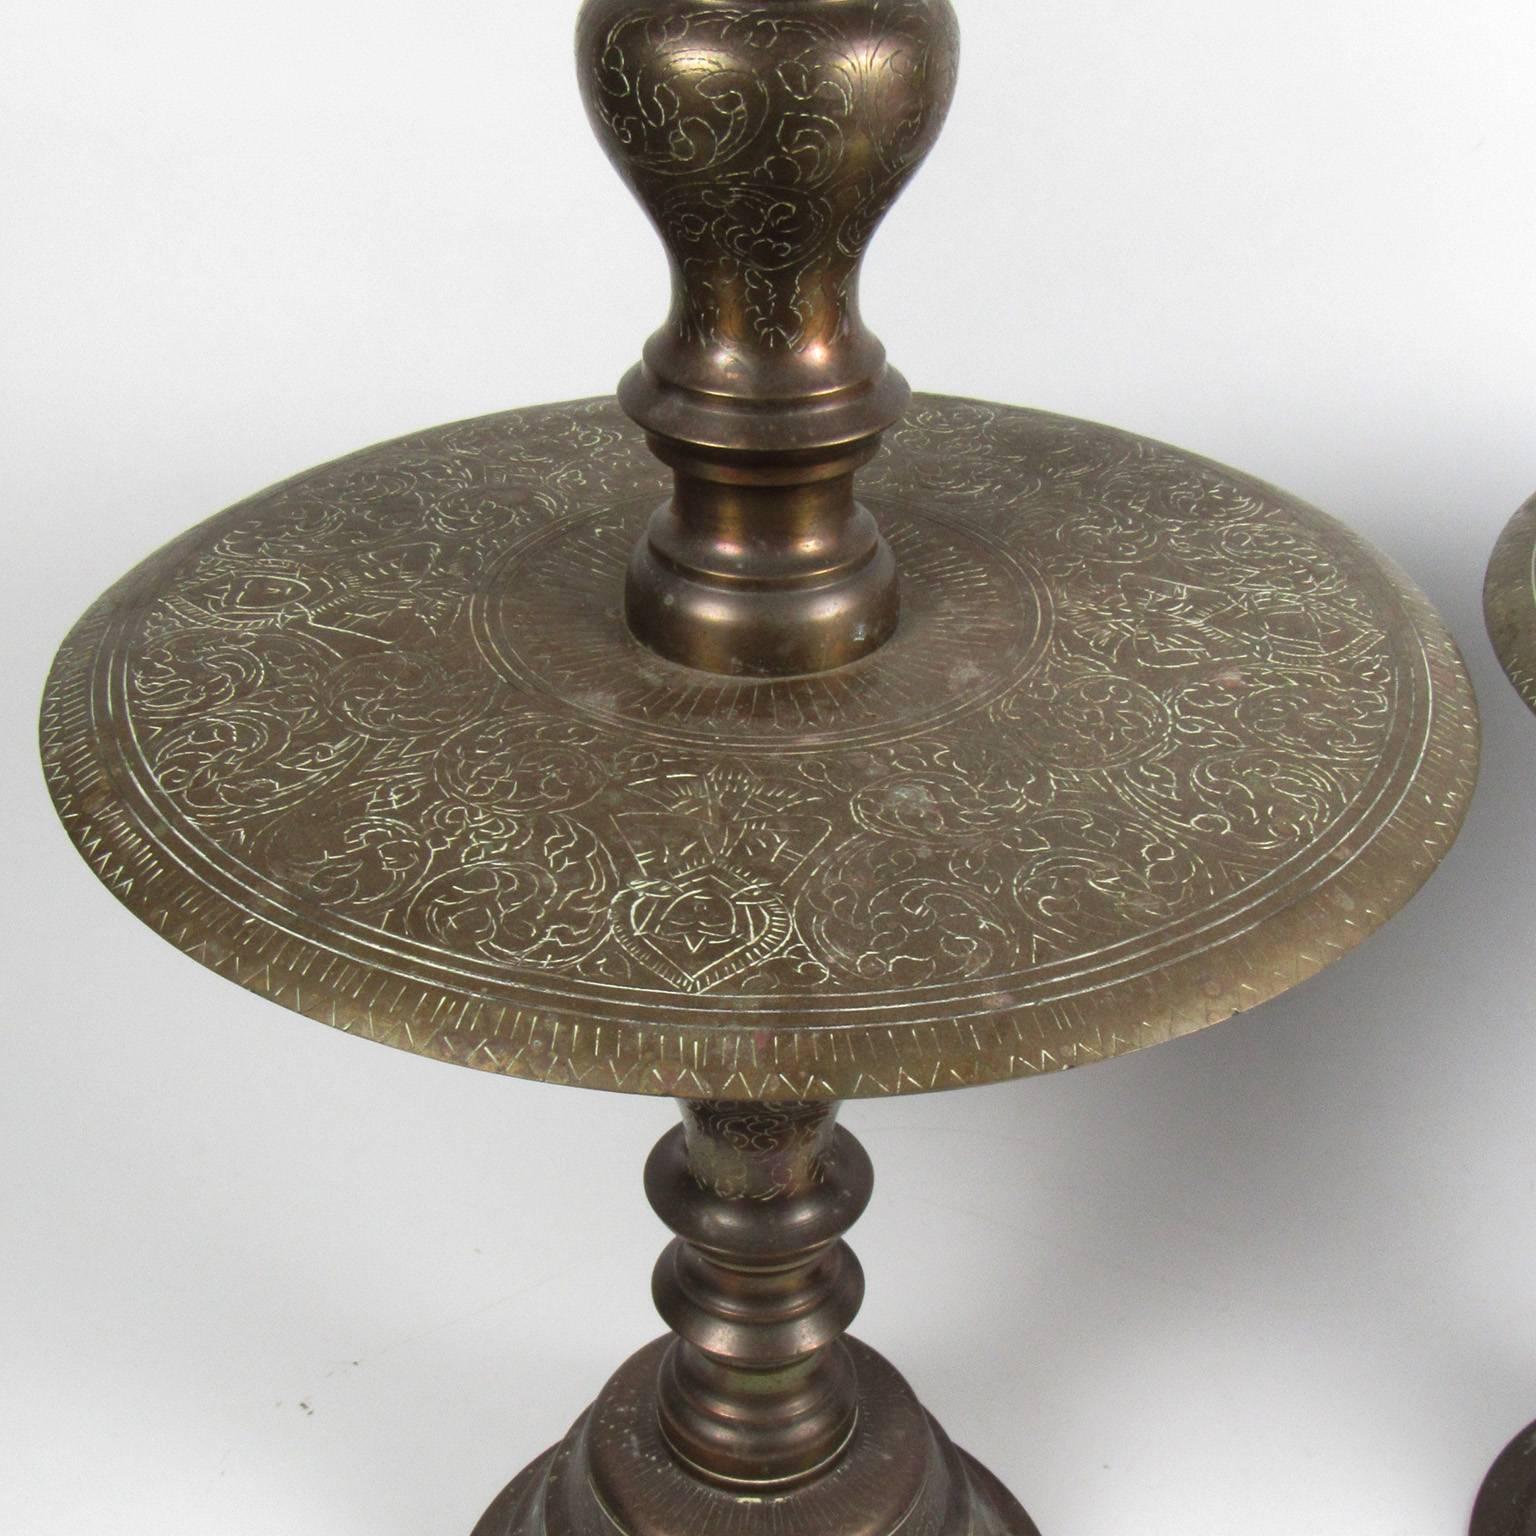 Very large pair of Indian etched brass candlesticks, early 20th century, height: 26 in., diameter: 11 1/2 in.